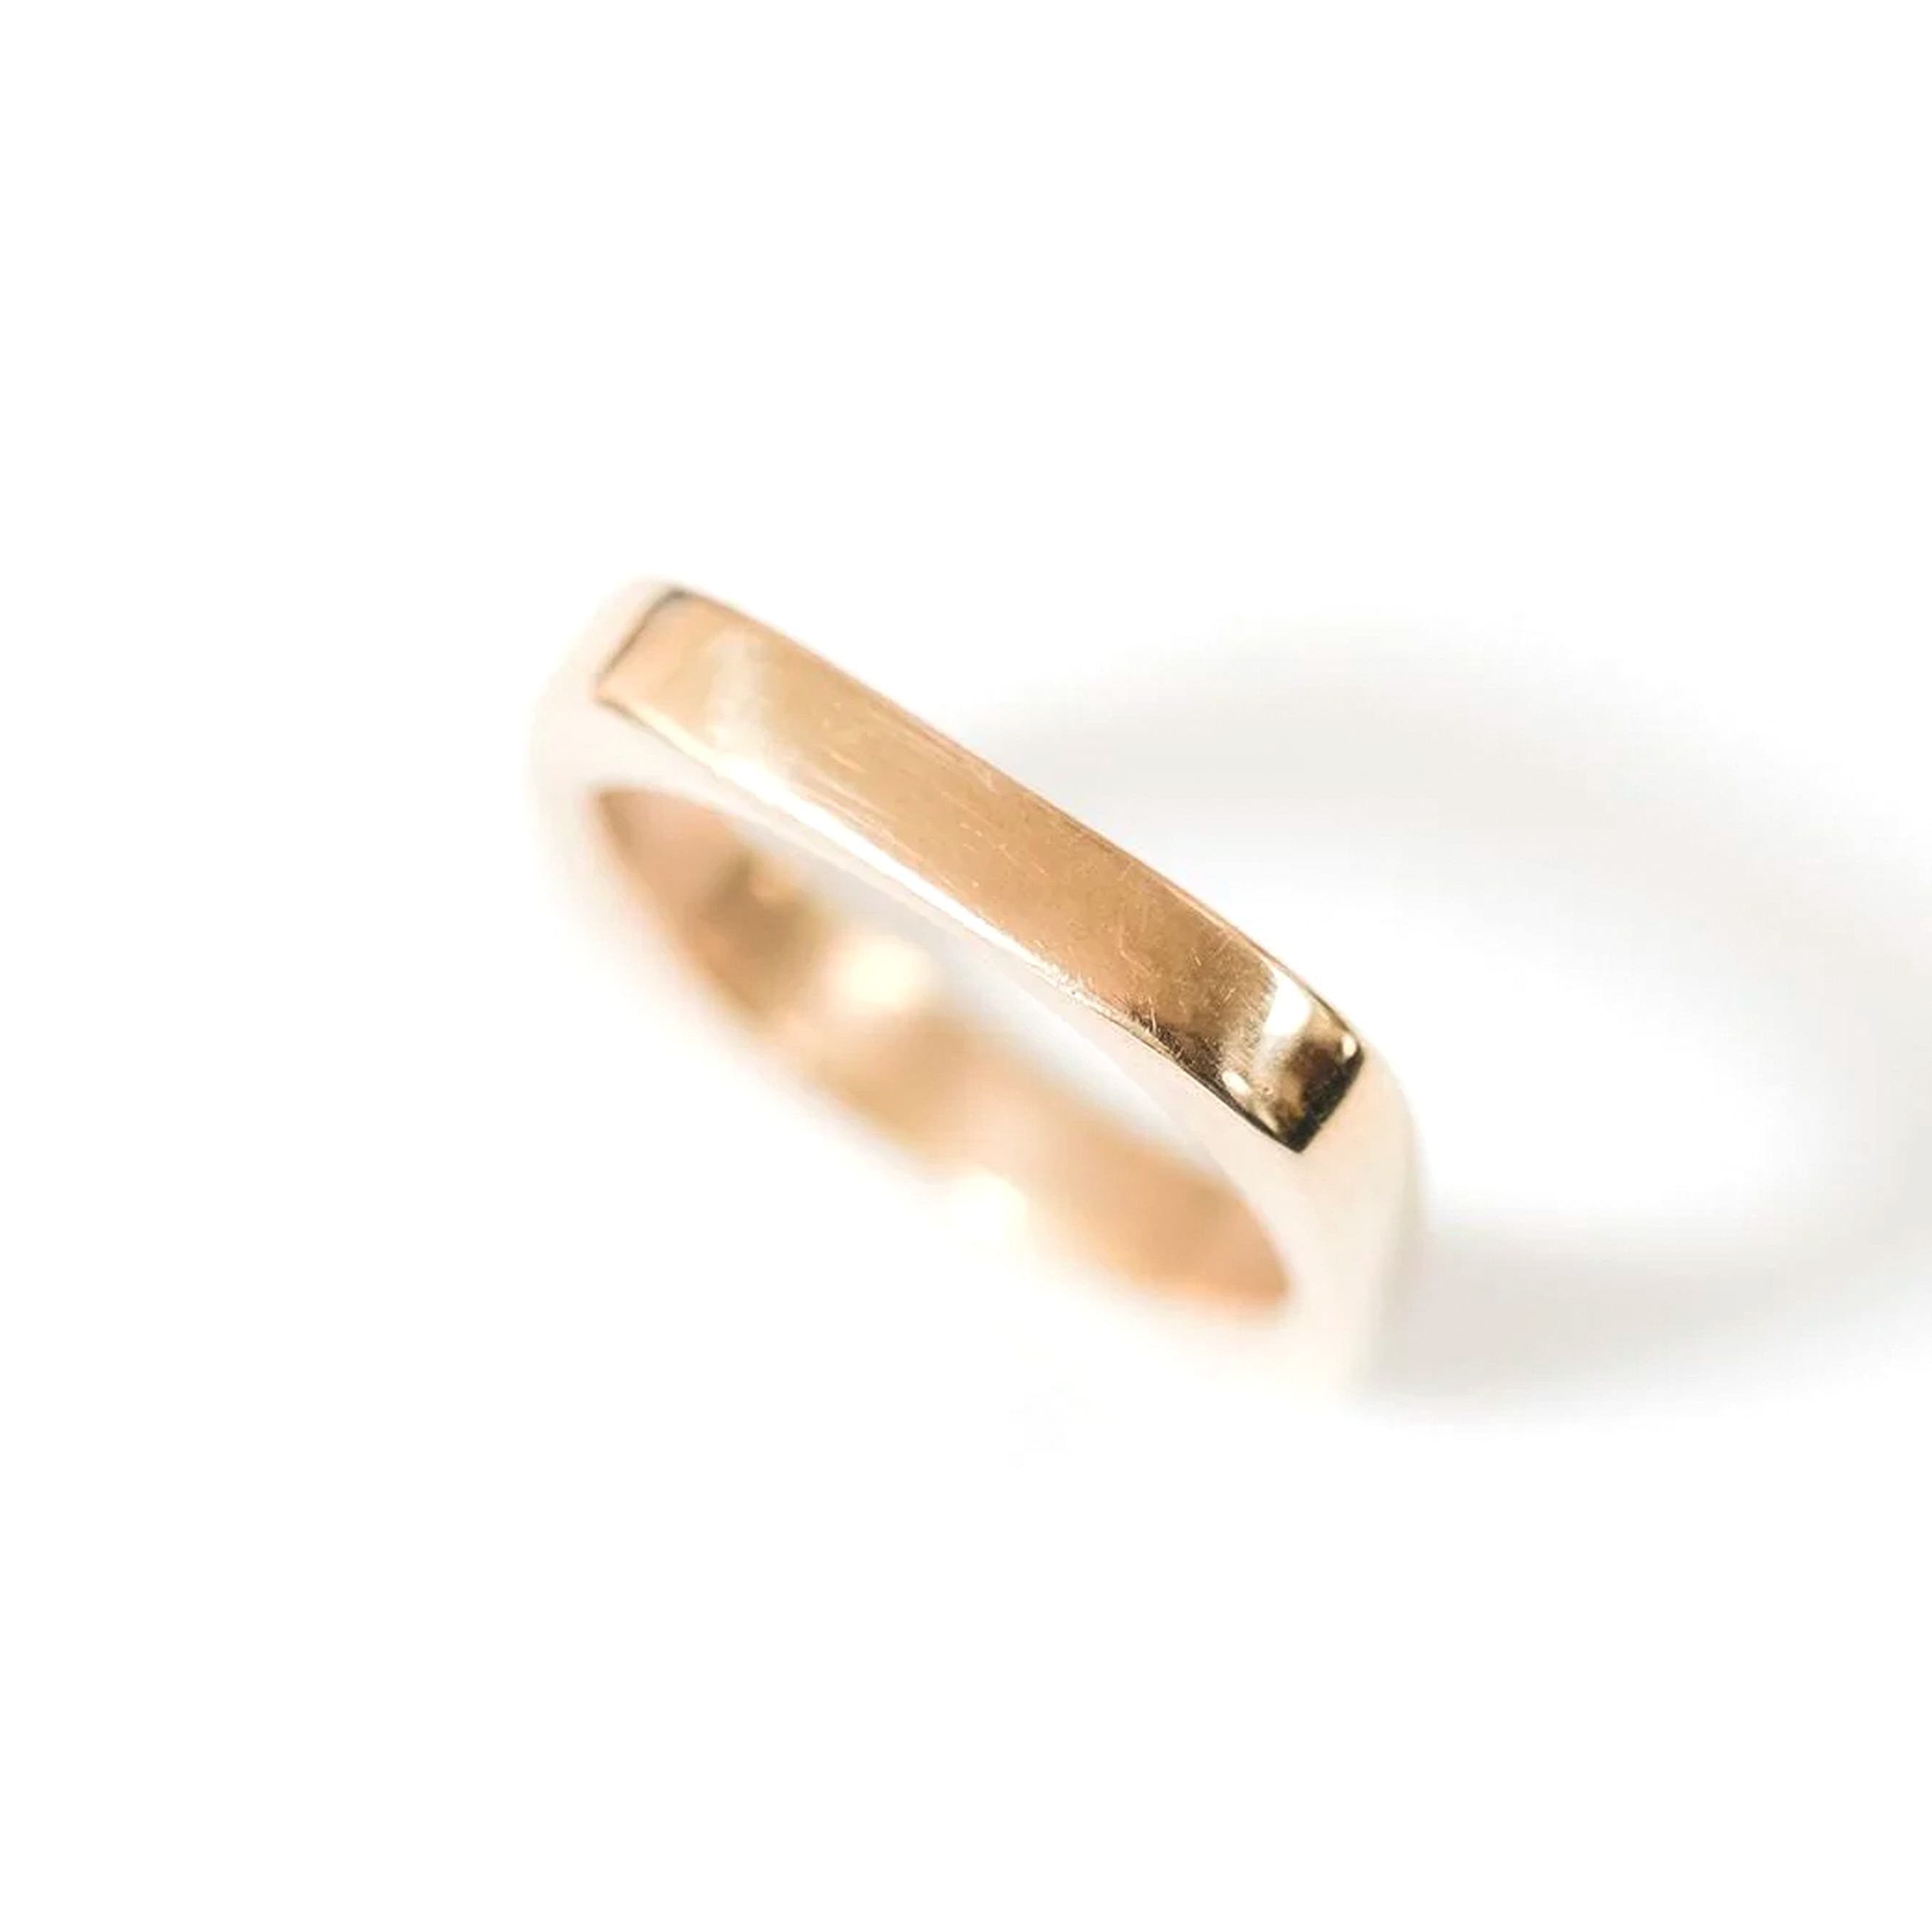 Abby Alley Thin Square Ring